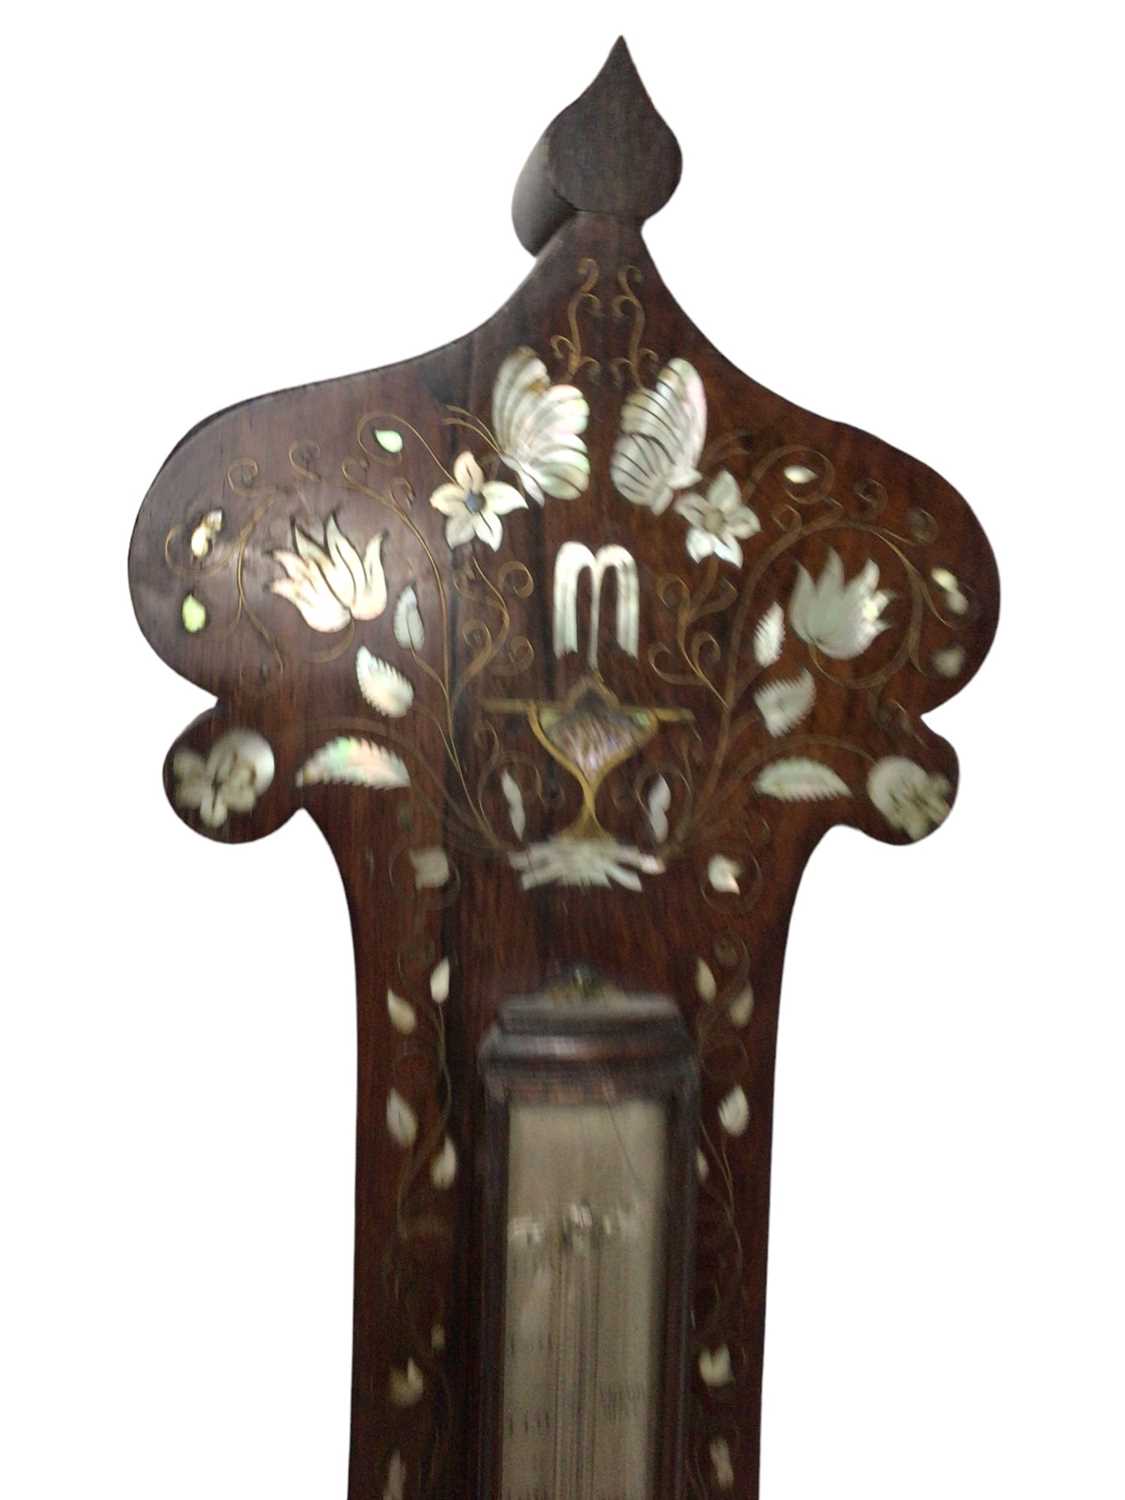 Early Victorian rosewood and mother of pearl inlaid barometer, signed S. Salkind, Ipswich - Image 5 of 7